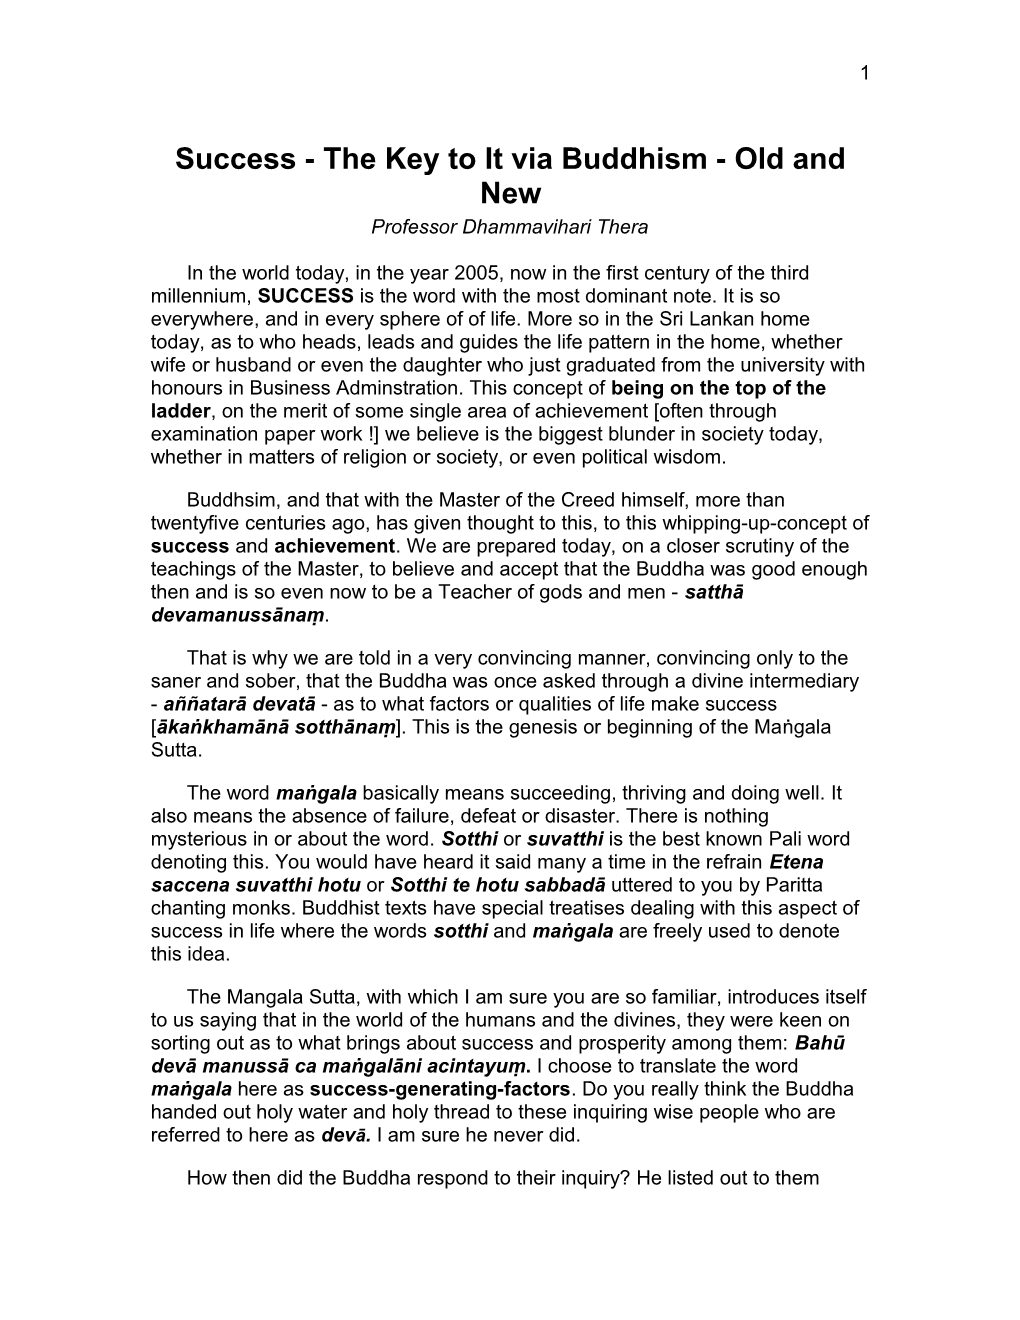 Success - the Key to It Via Buddhism - Old and New